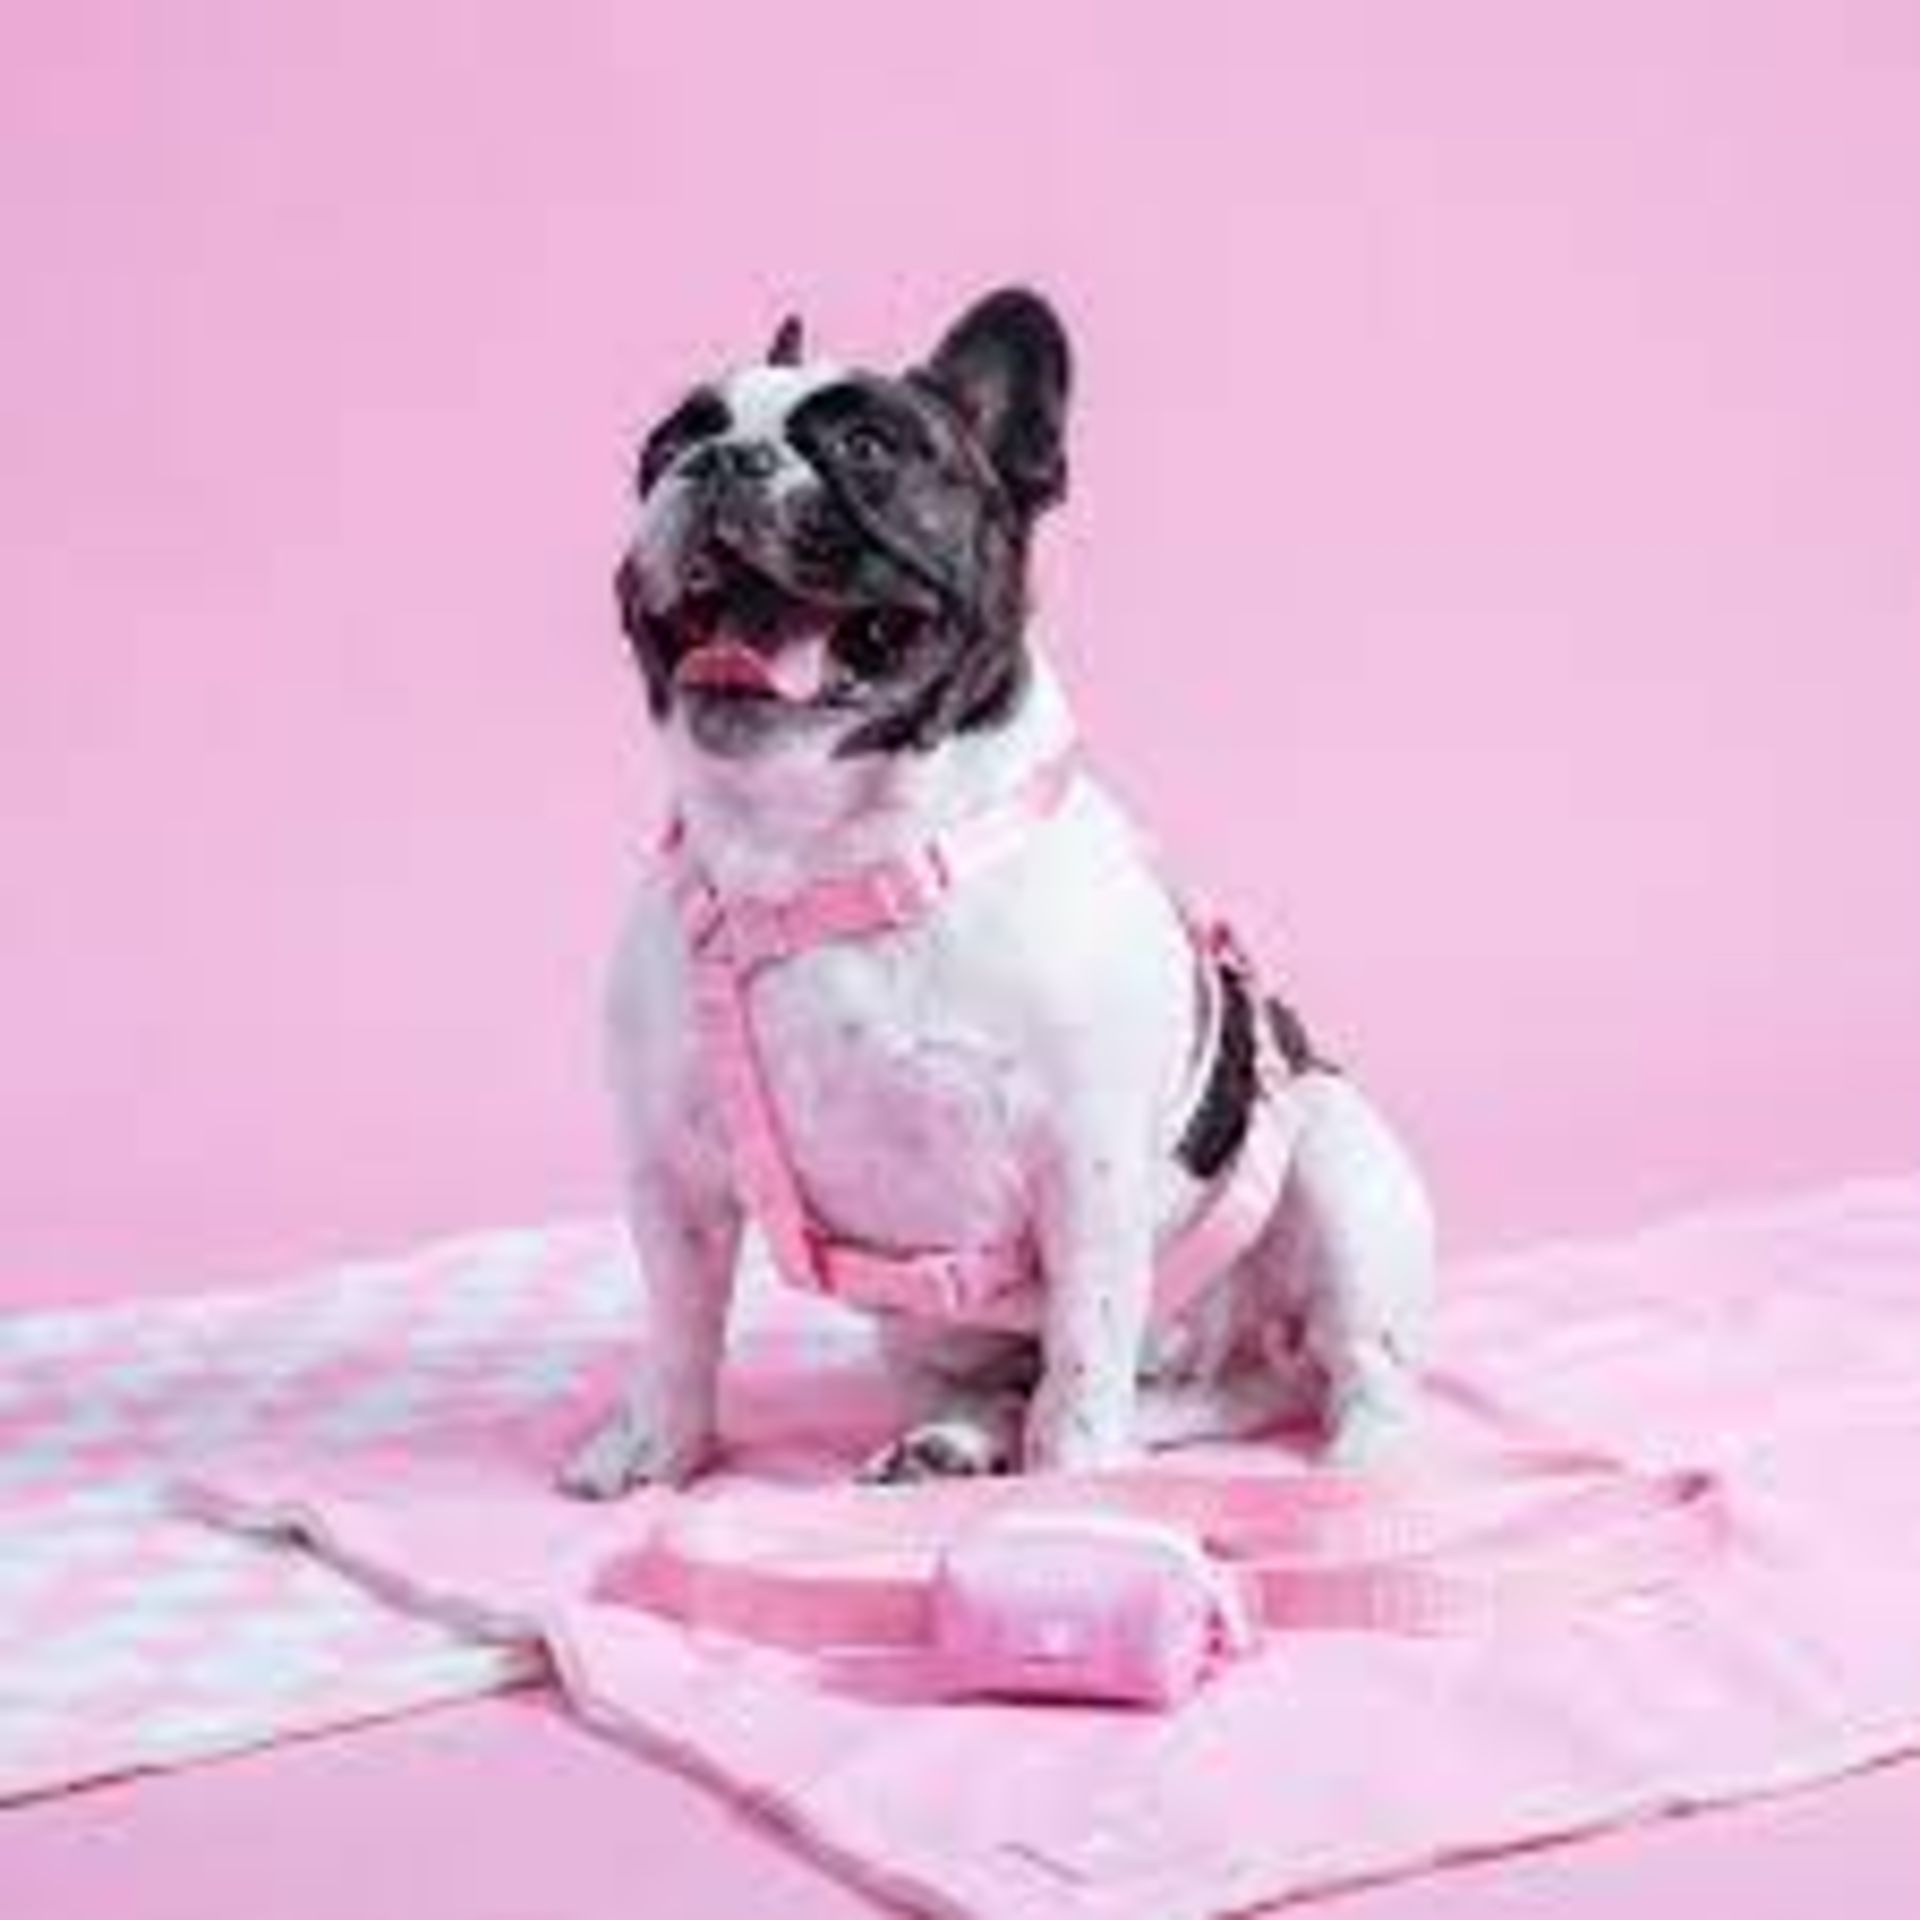 Trade Lot 100 X New & Packaged Frenchie The Bulldog Luxury Branded Dog Products. May include items - Image 27 of 50